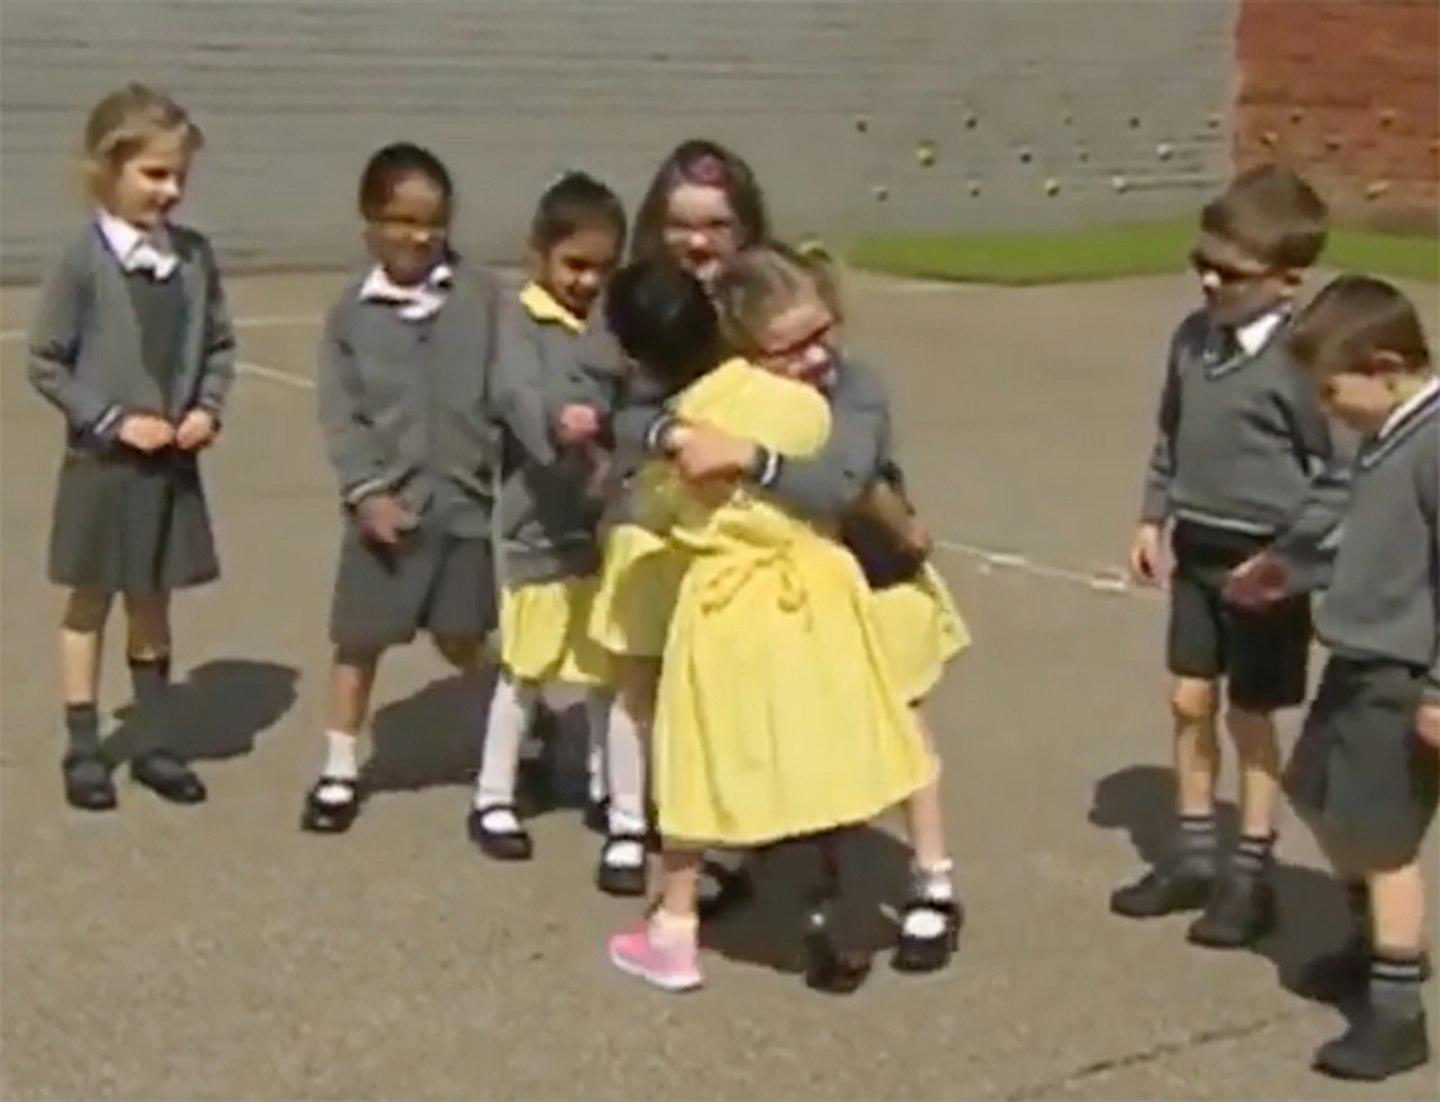 7-year-old-girl-shows-friends-new-prosthetic-leg-first-time-anu-birmingham copy